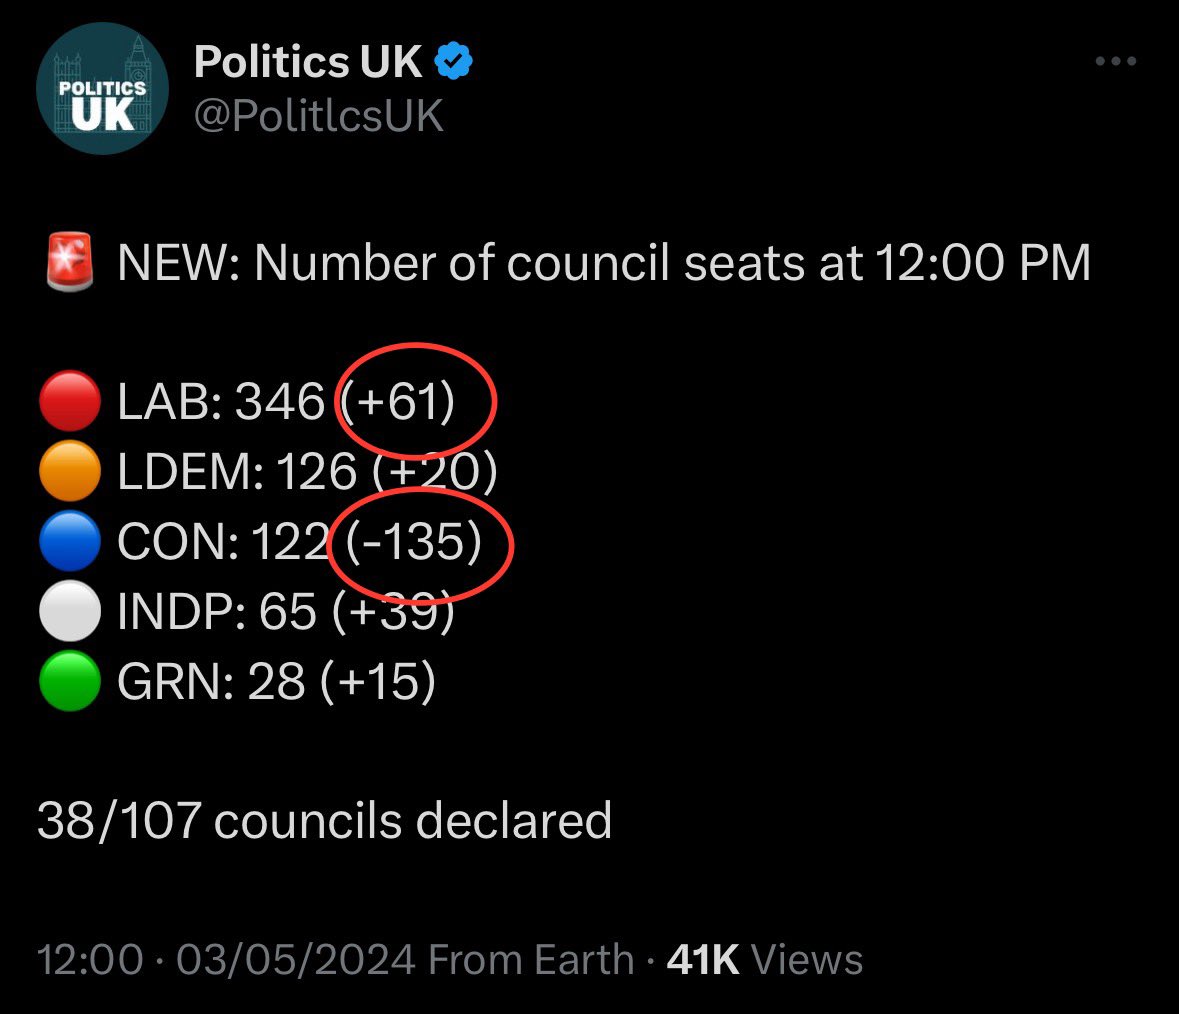 Tory losses are not being translated to Labour gains. Very concerning for the Labour Party 👀